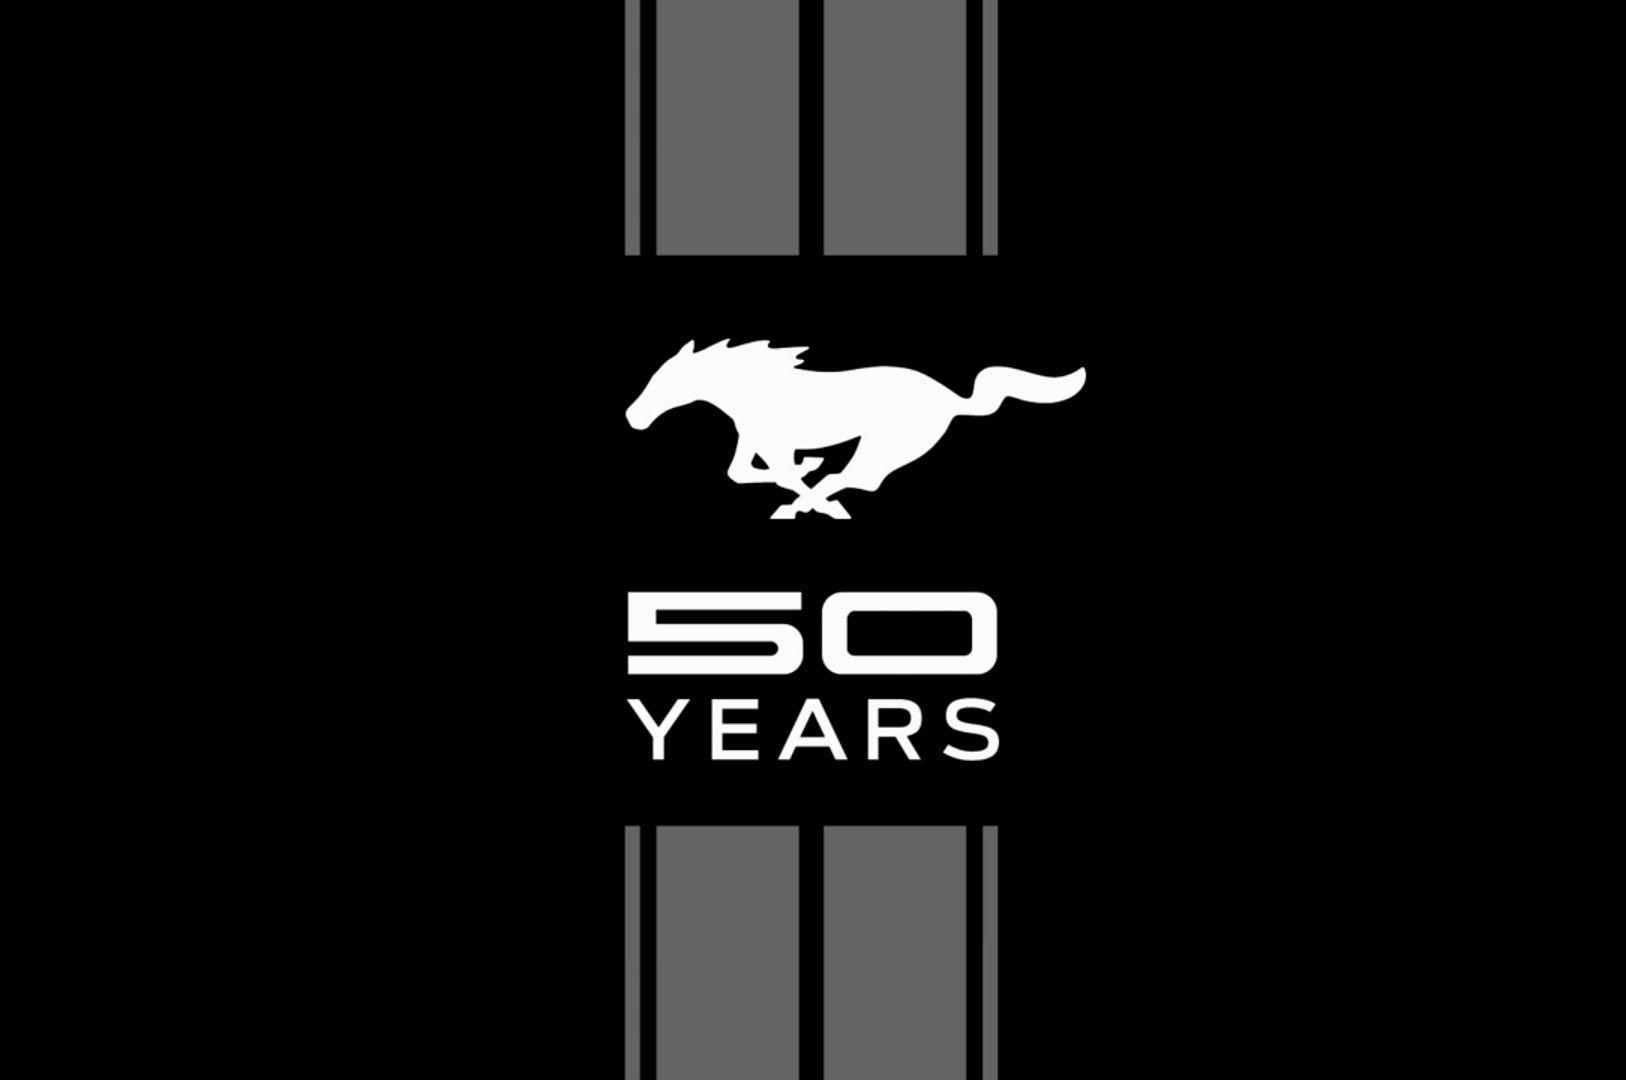 Ford Mustang 50th Anniversary Logo - First 000 Next Gen Mustangs To Be Limited Edition 2014 1 2 Models